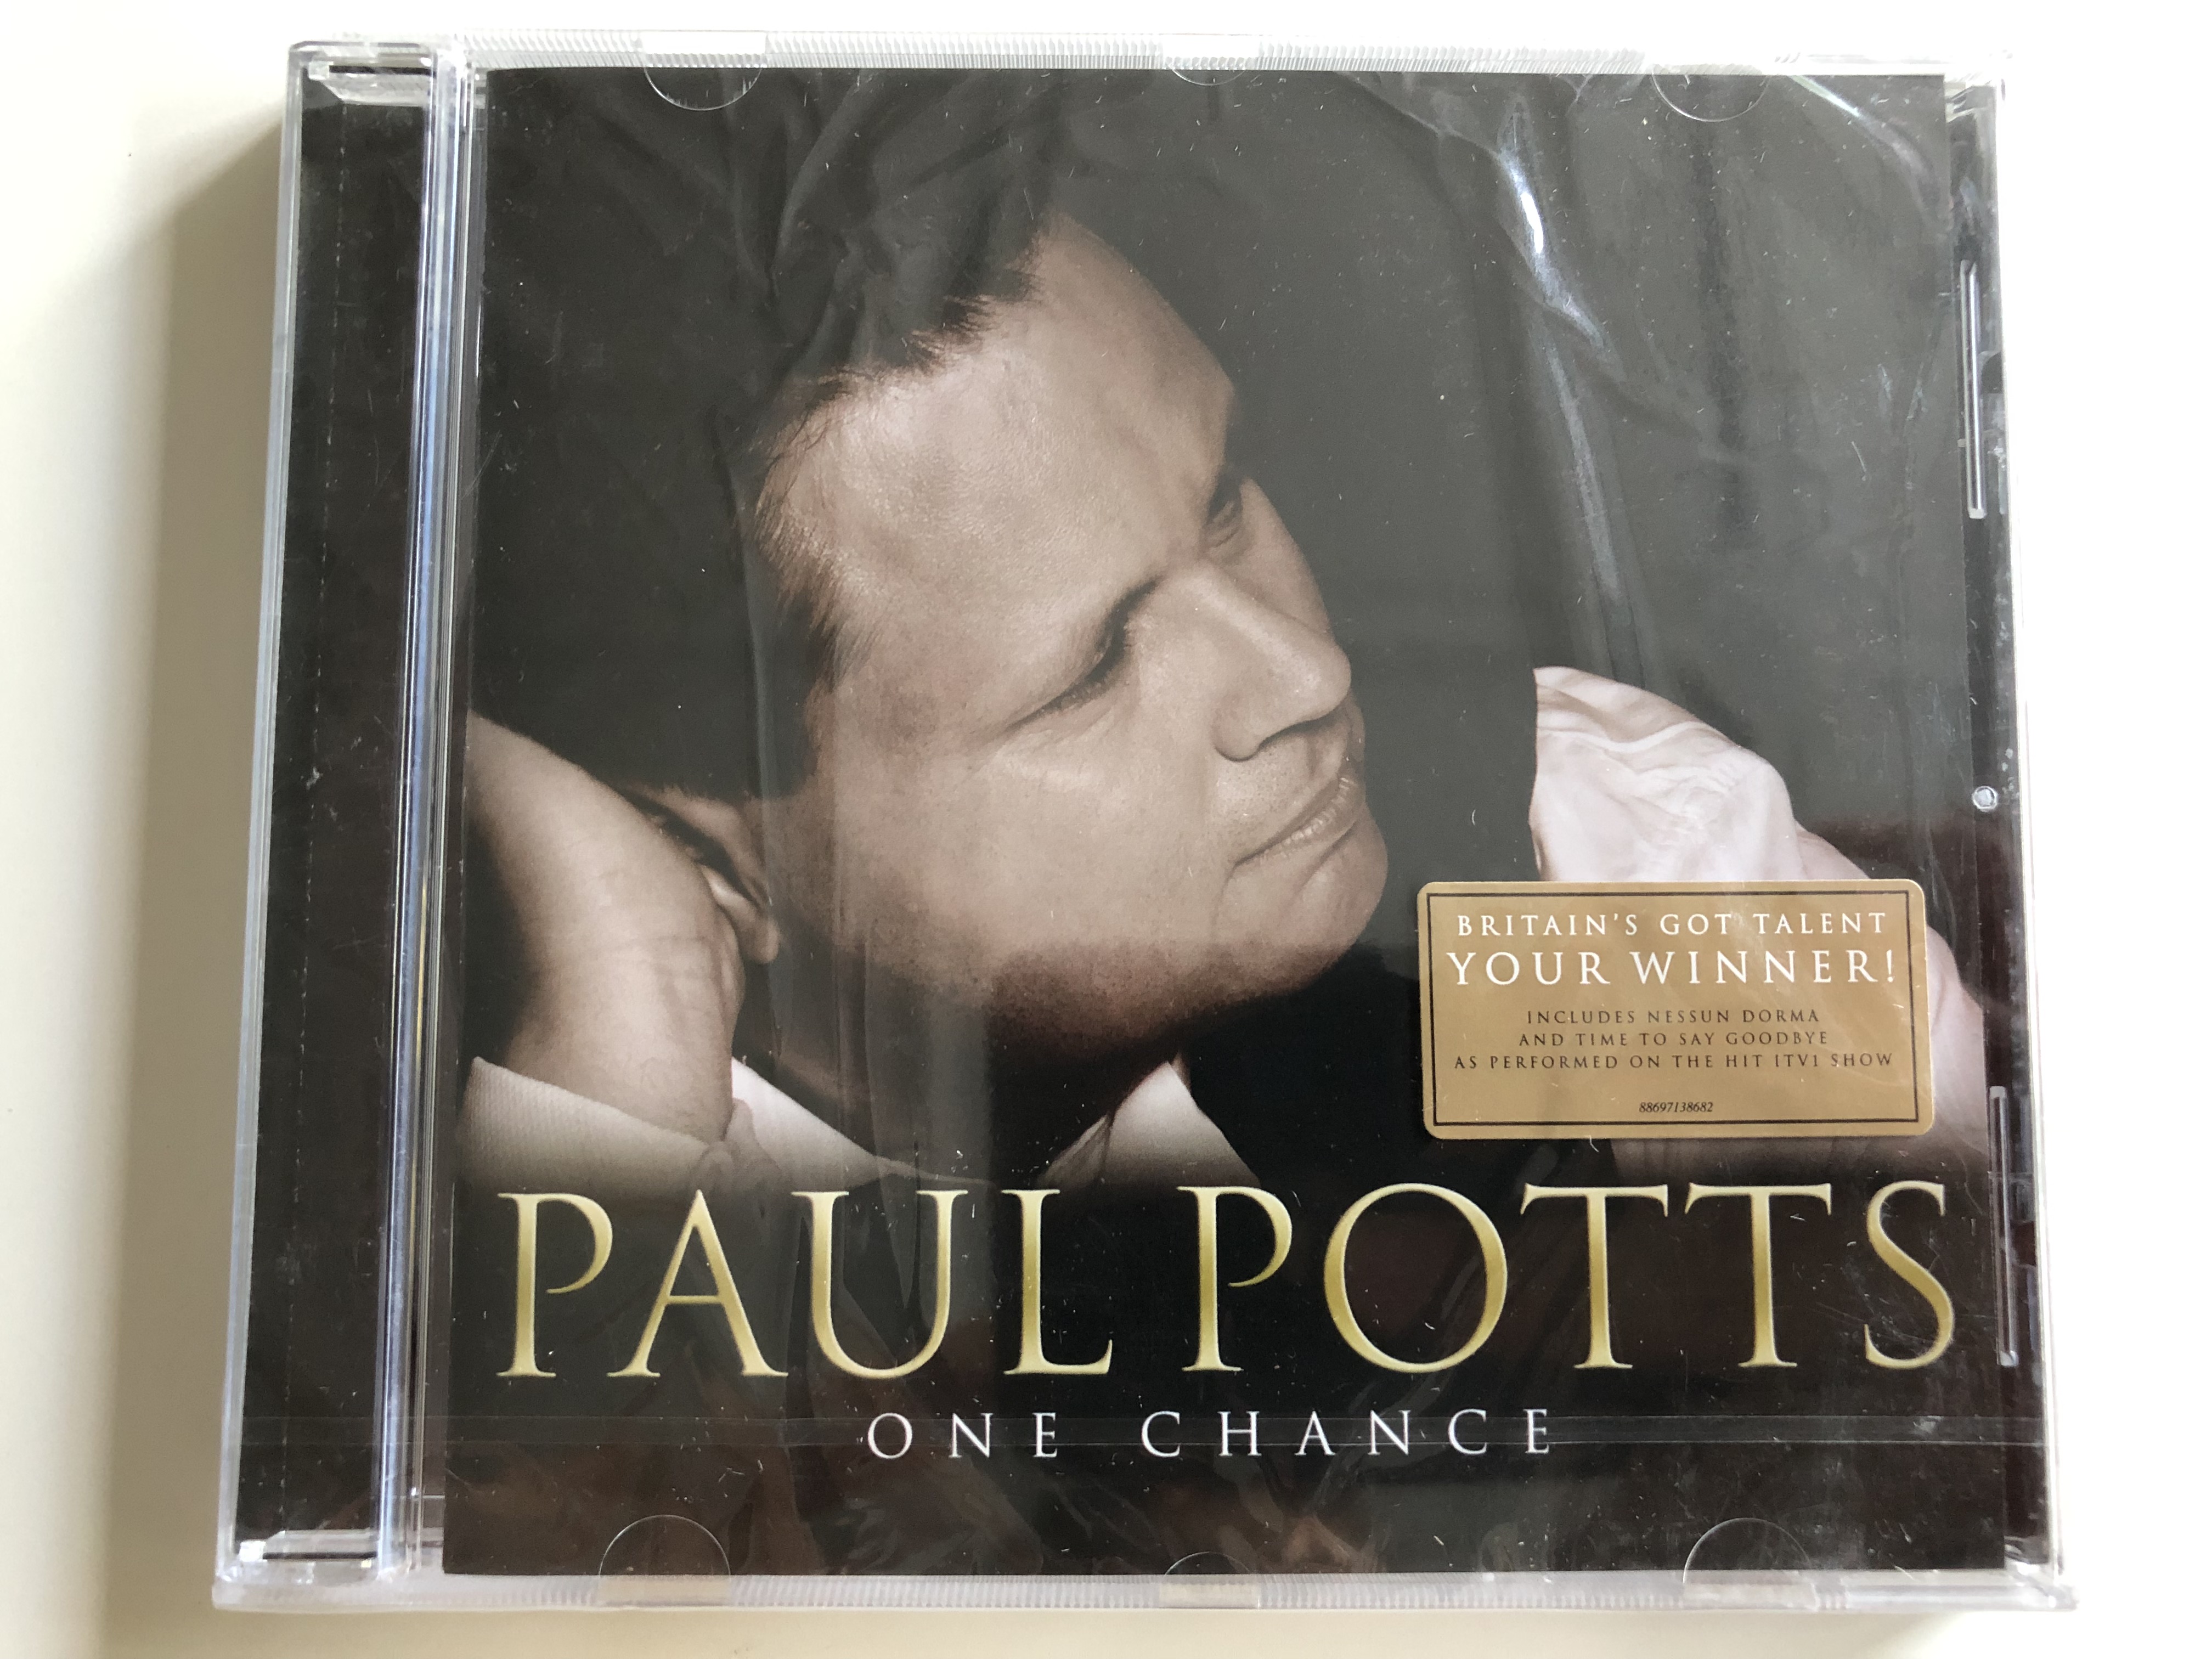 paul-potts-one-chance-includes-nessun-dorma-and-time-to-say-goodbye-as-performed-on-the-hit-itv1-show-audio-cd-2007-sony-bmg-1-.jpg